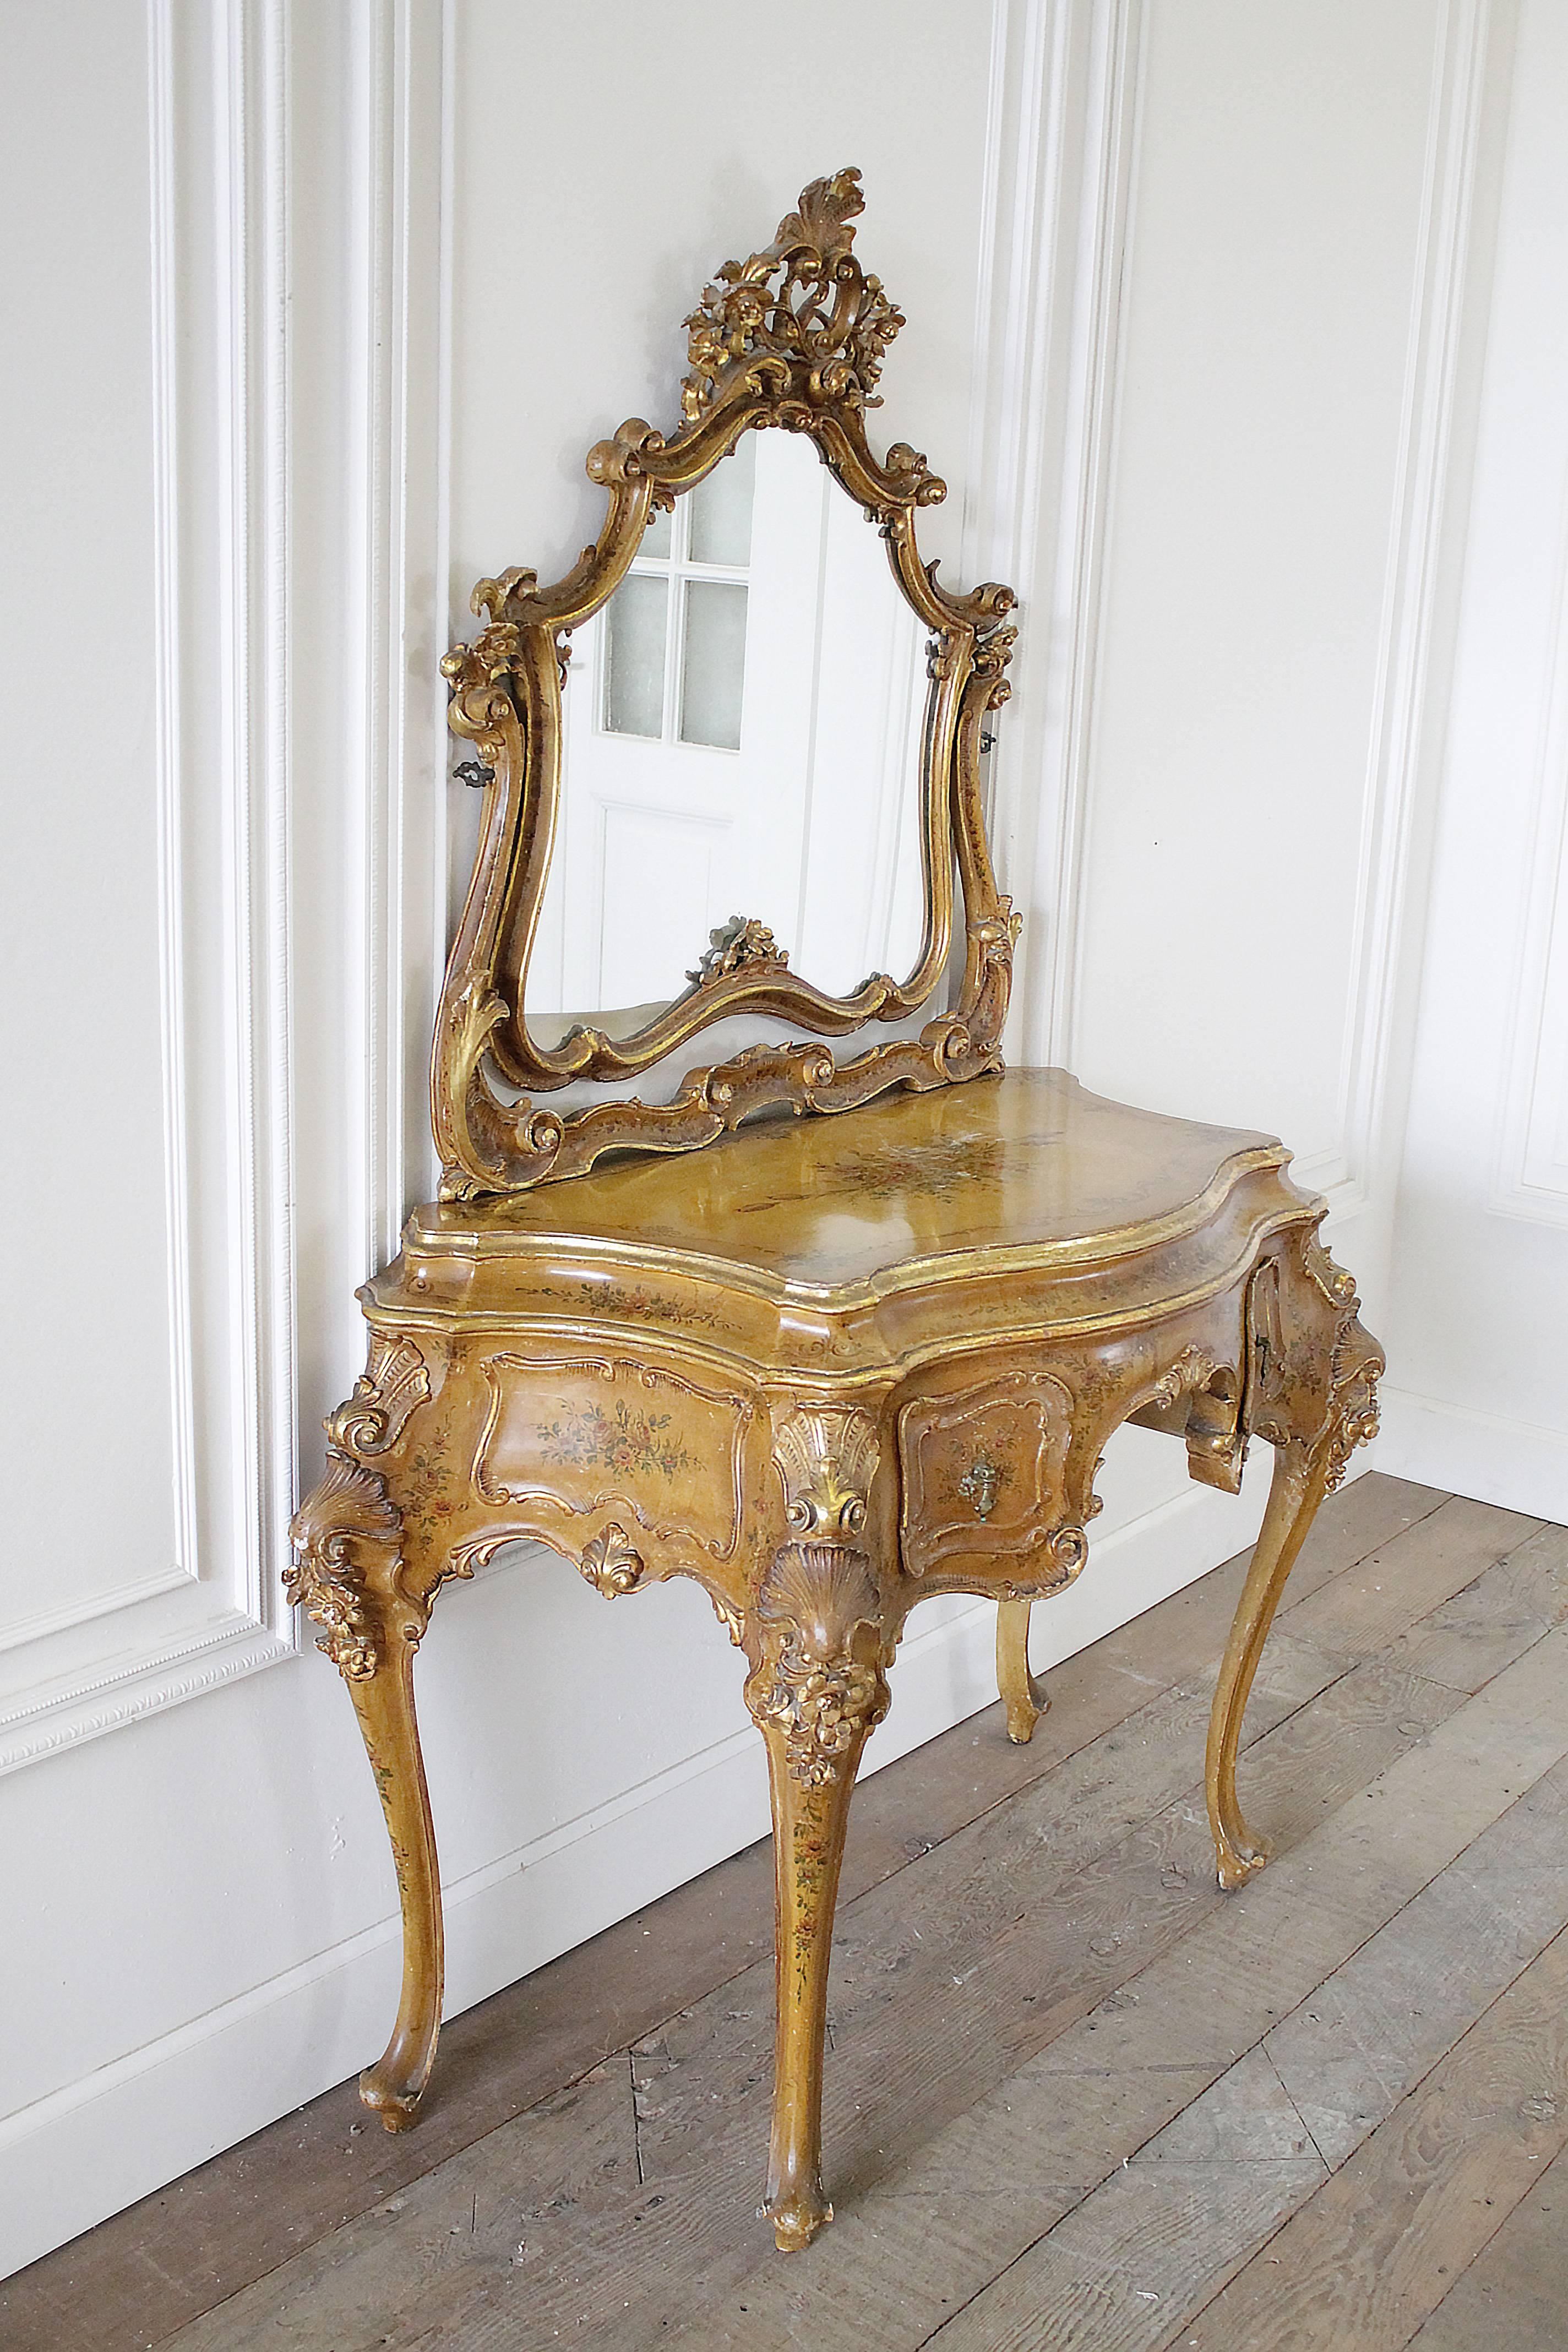 Gorgeous Italian vanity has the original finish in a dark mustard tone, with hand-painted bouquets of flowers. There are two working small drawers and mirror, that looks to be original. The carvings are exquisite, with shells, and flowers, and